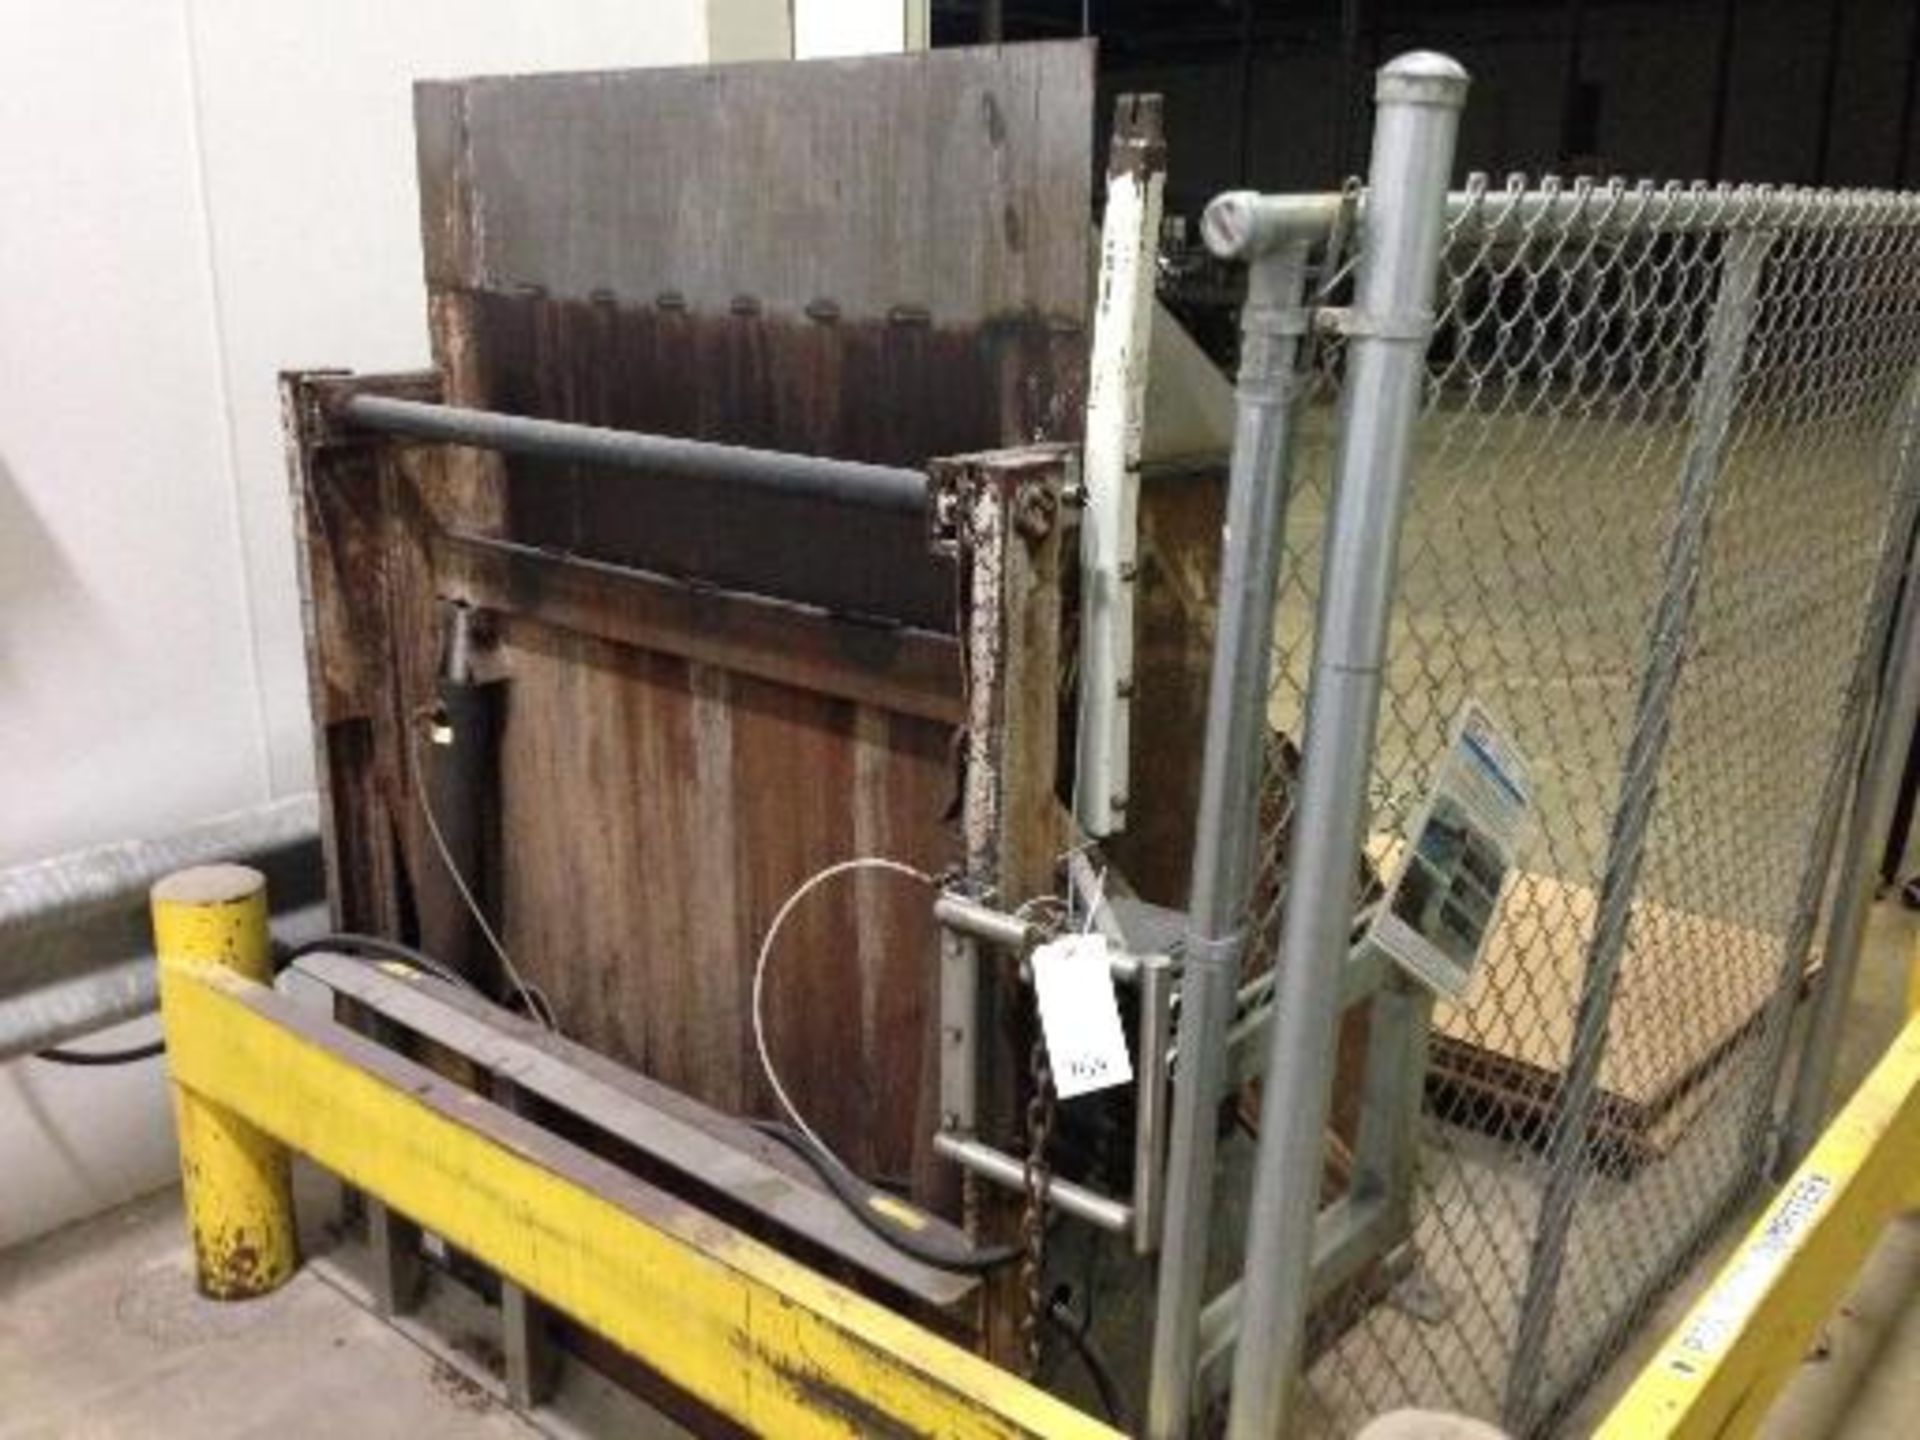 Mild Steel tote dump for waste product, with hyd. Pump This item located in Grand Rapids,